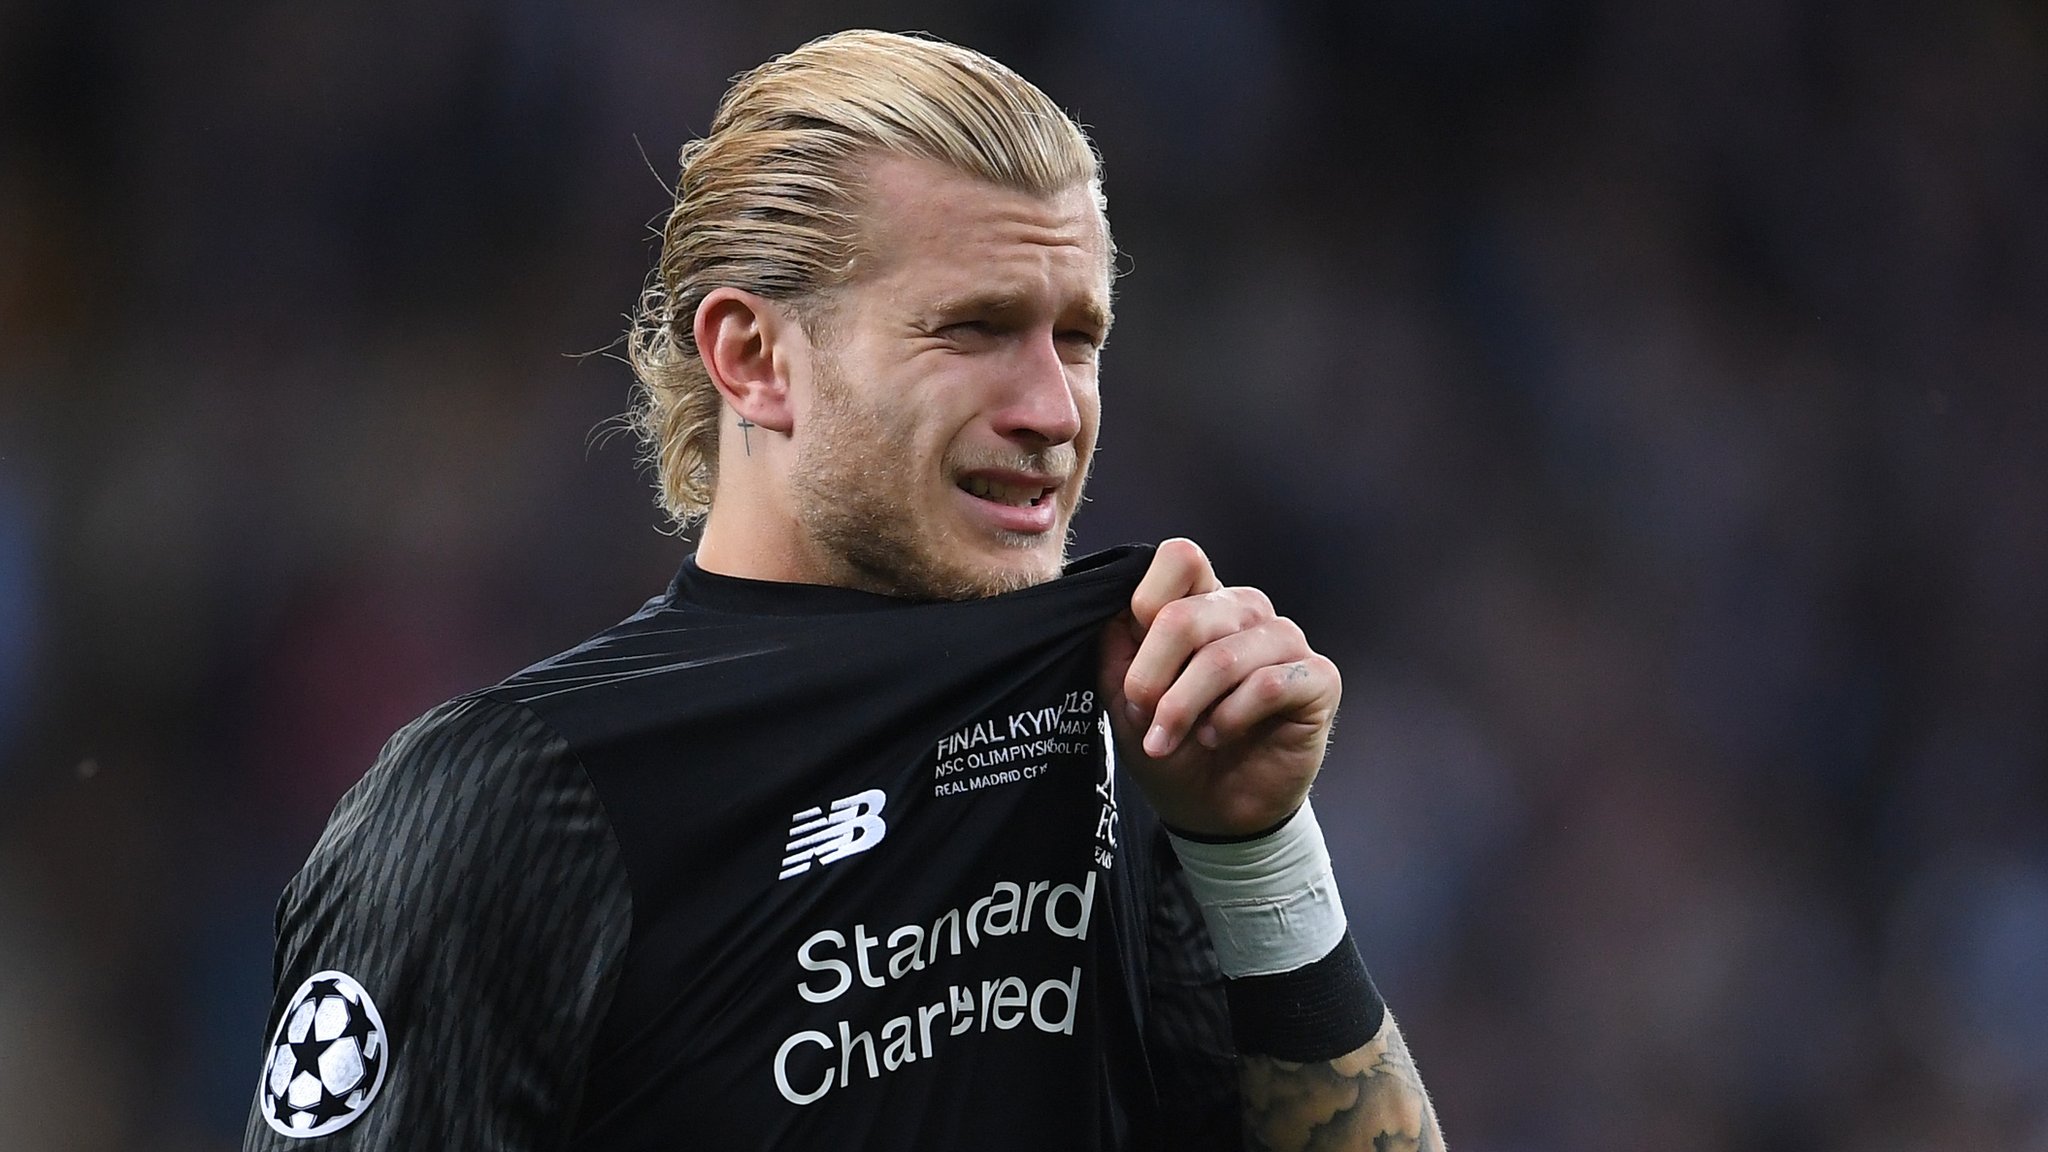 Karius '100%' influenced by concussion in Champions League final - Klopp